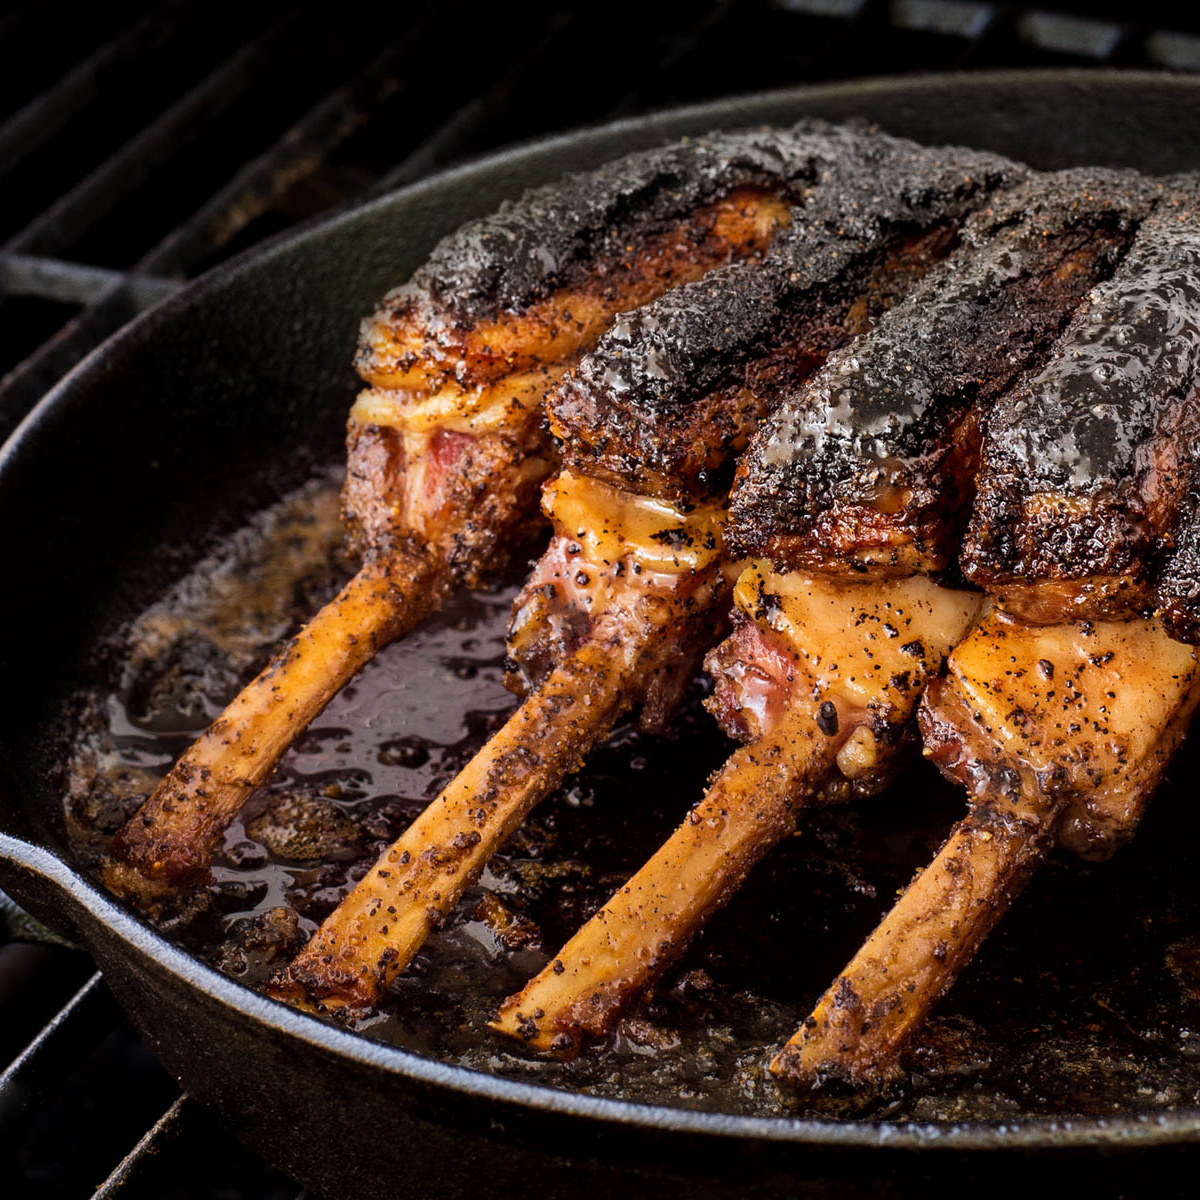 Rack of lamb cooking in a cast iron skillet on the grill.